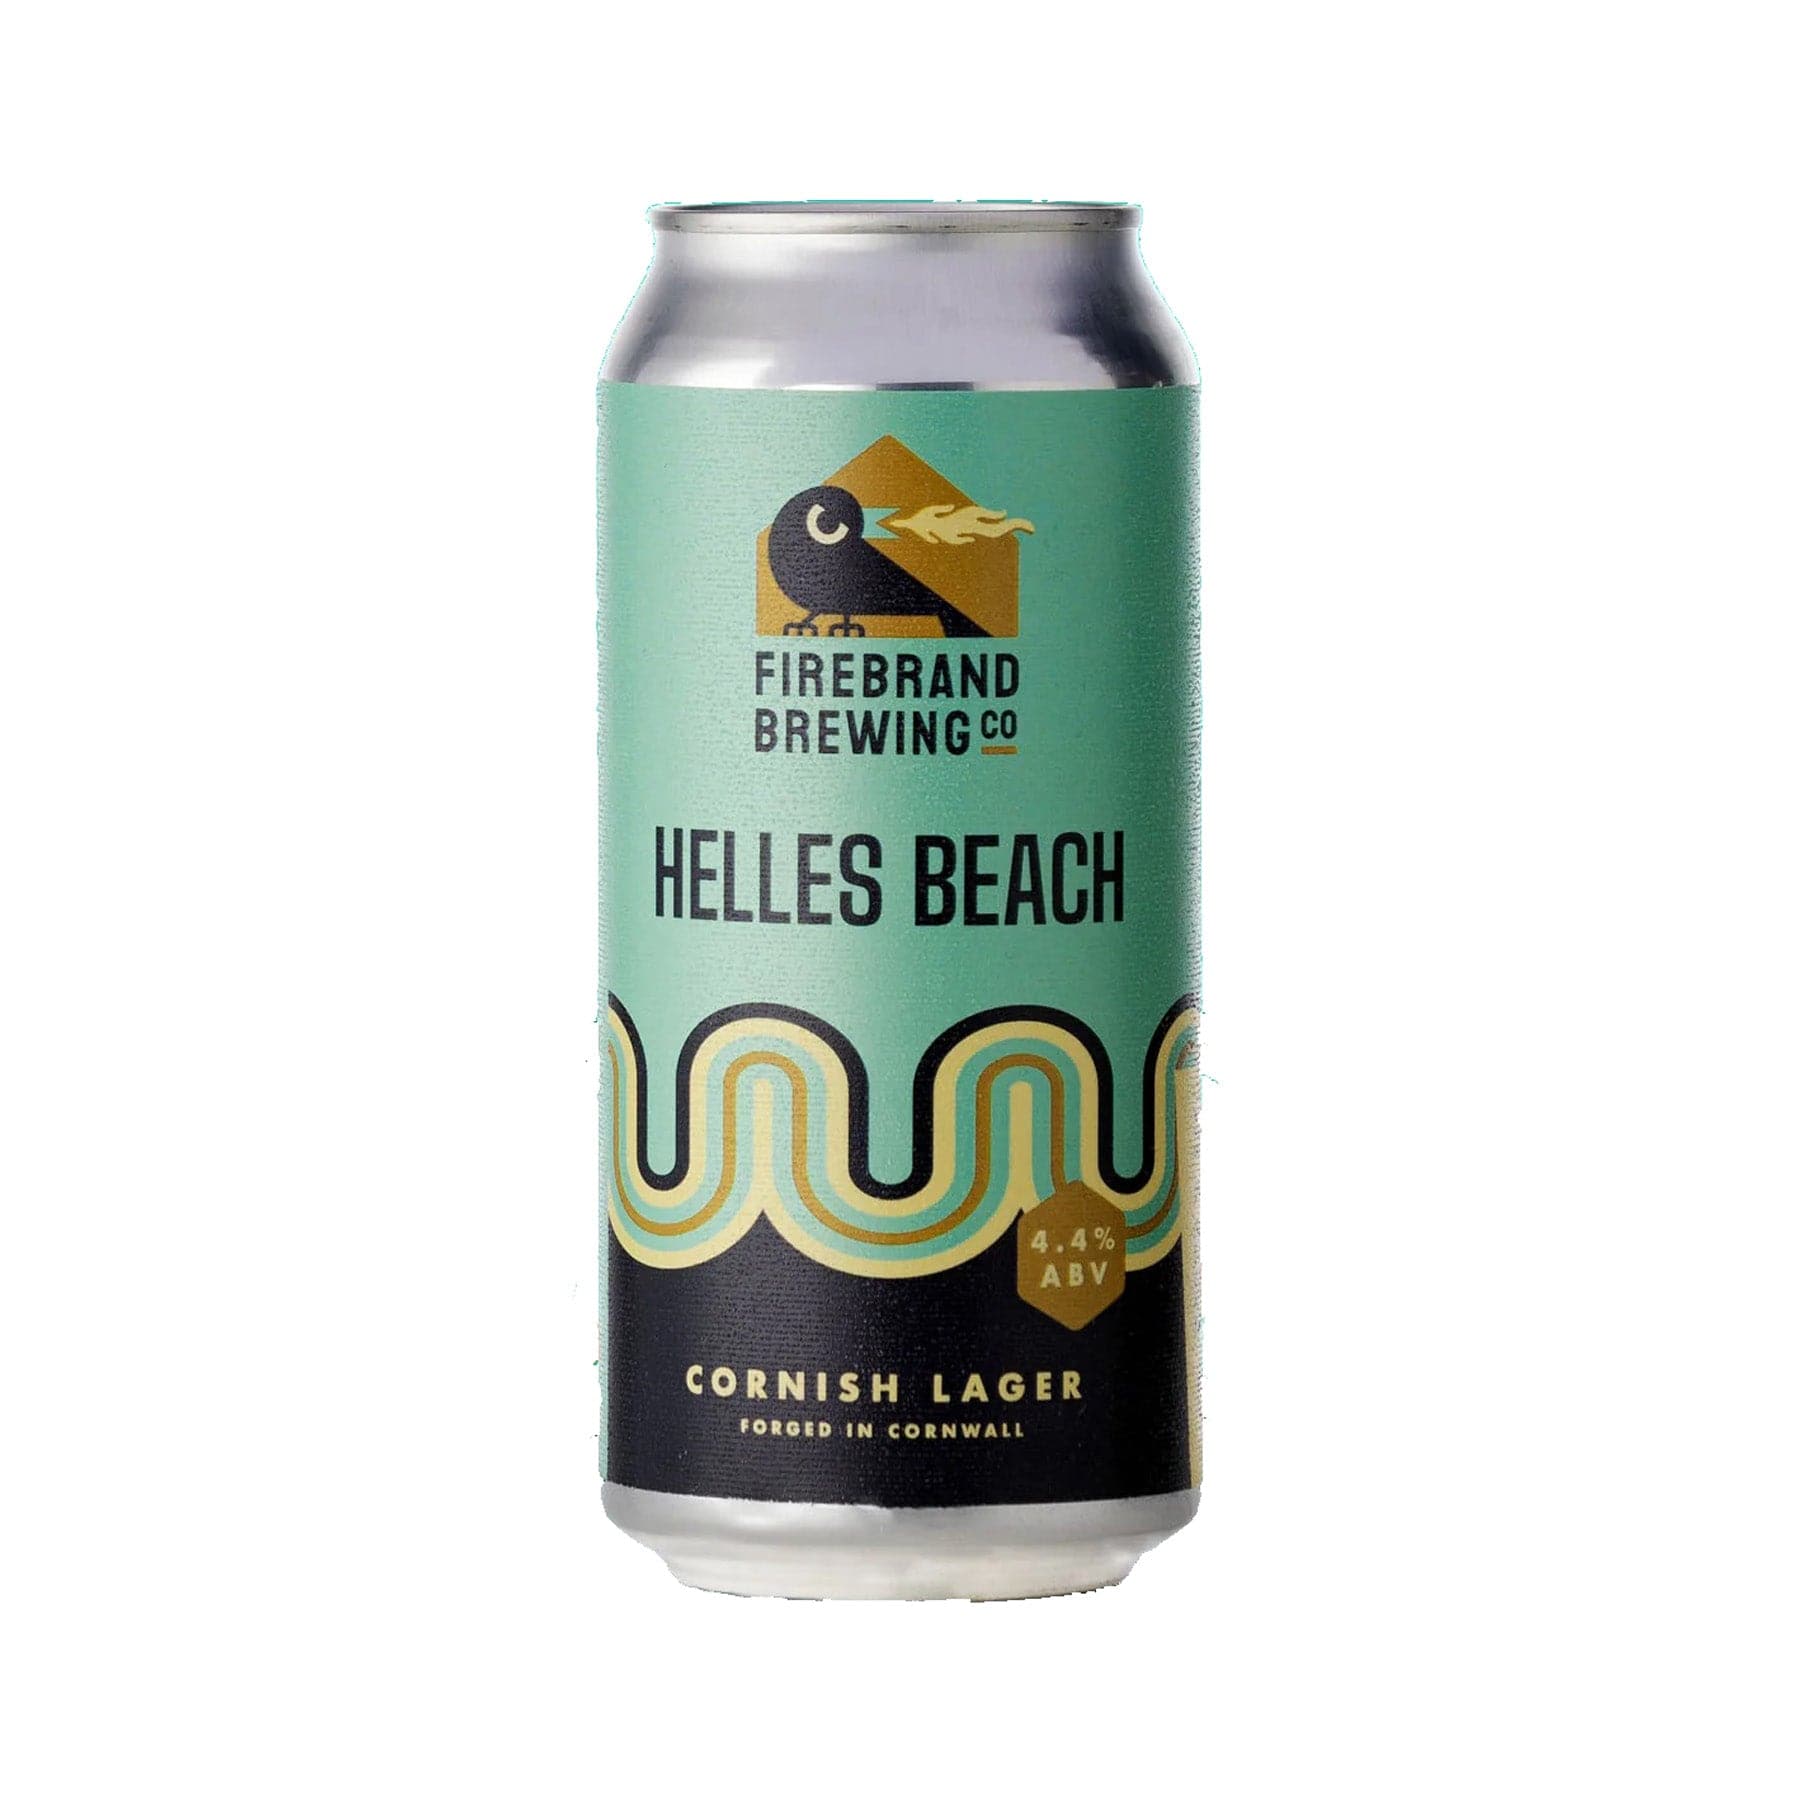 Firebrand Brewing Co Helles Beach Cornish Lager beer can with 4.4% ABV, refreshing alcoholic beverage forged in Cornwall, aqua blue can design with wave pattern